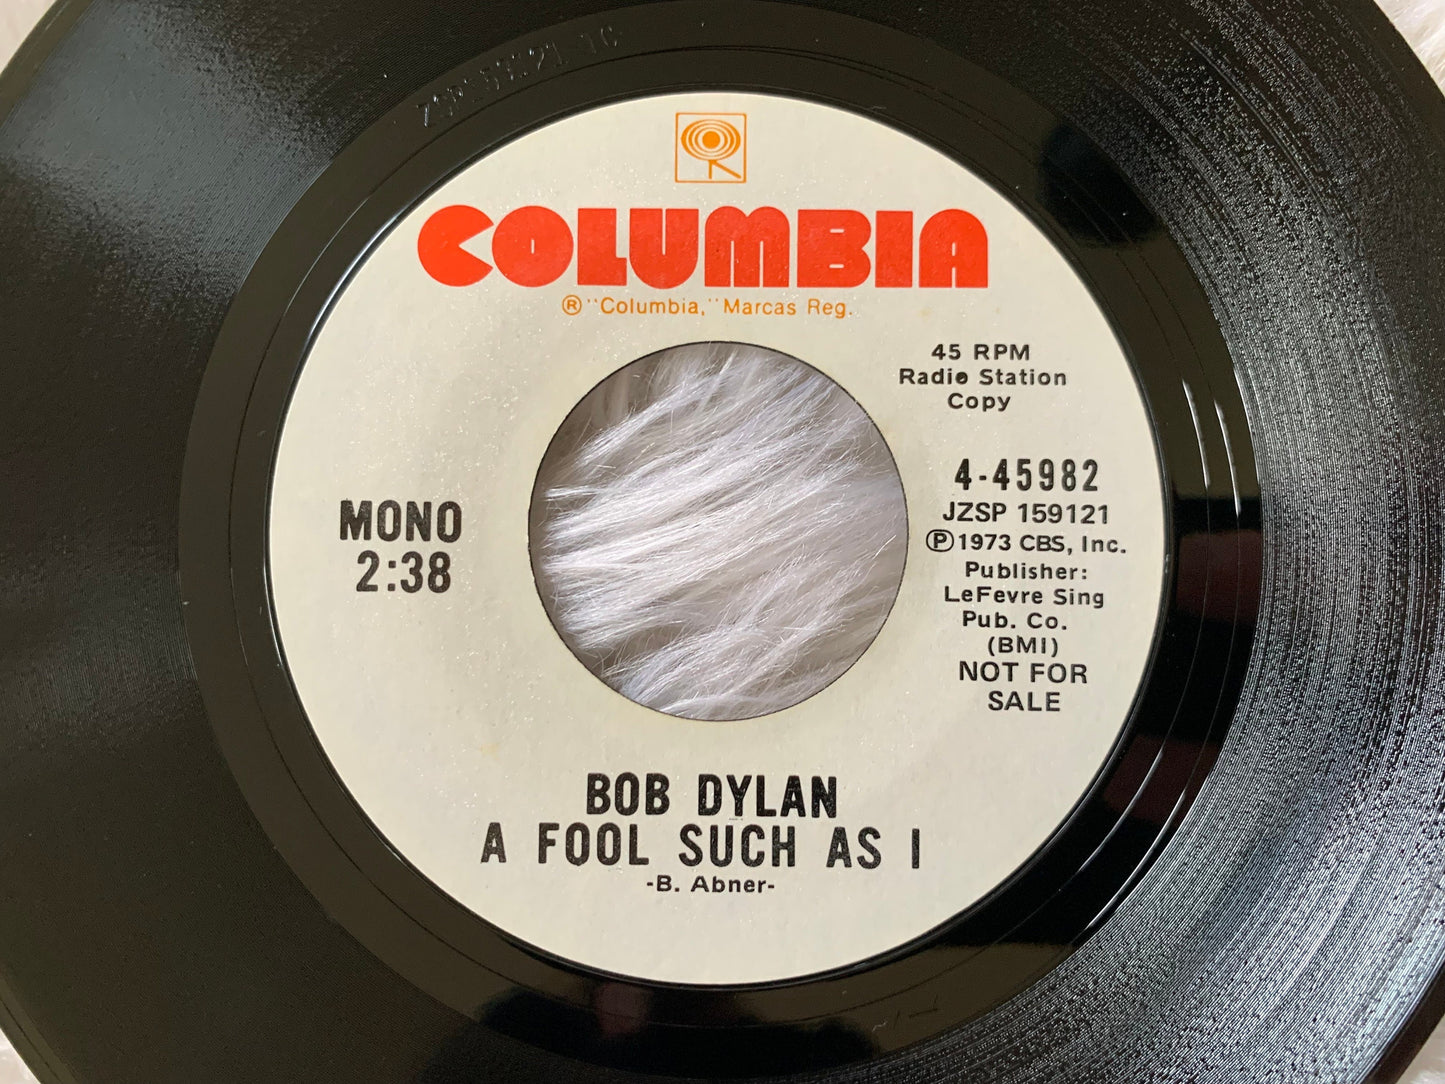 Bob Dylan A Fool Such As I, Mono/Stereo 1973 Columbia 4-45982 Vinyl Records 70's Bob Dylan Singles 45 RPM 7" Records